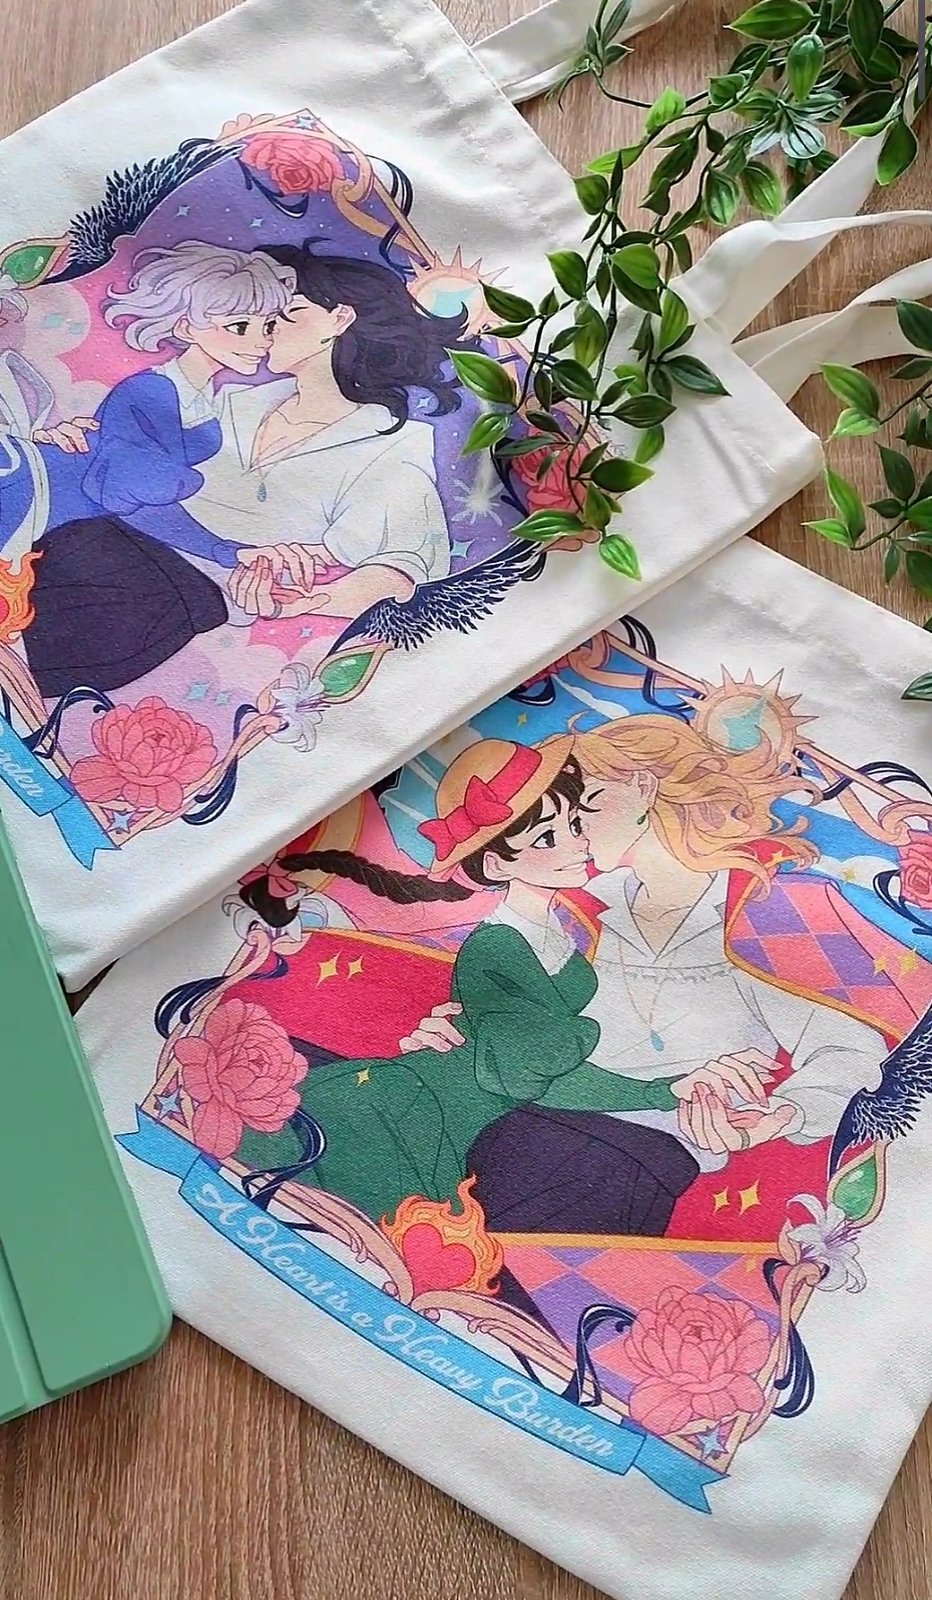 Howl's Moving Castle TOTE BAGS